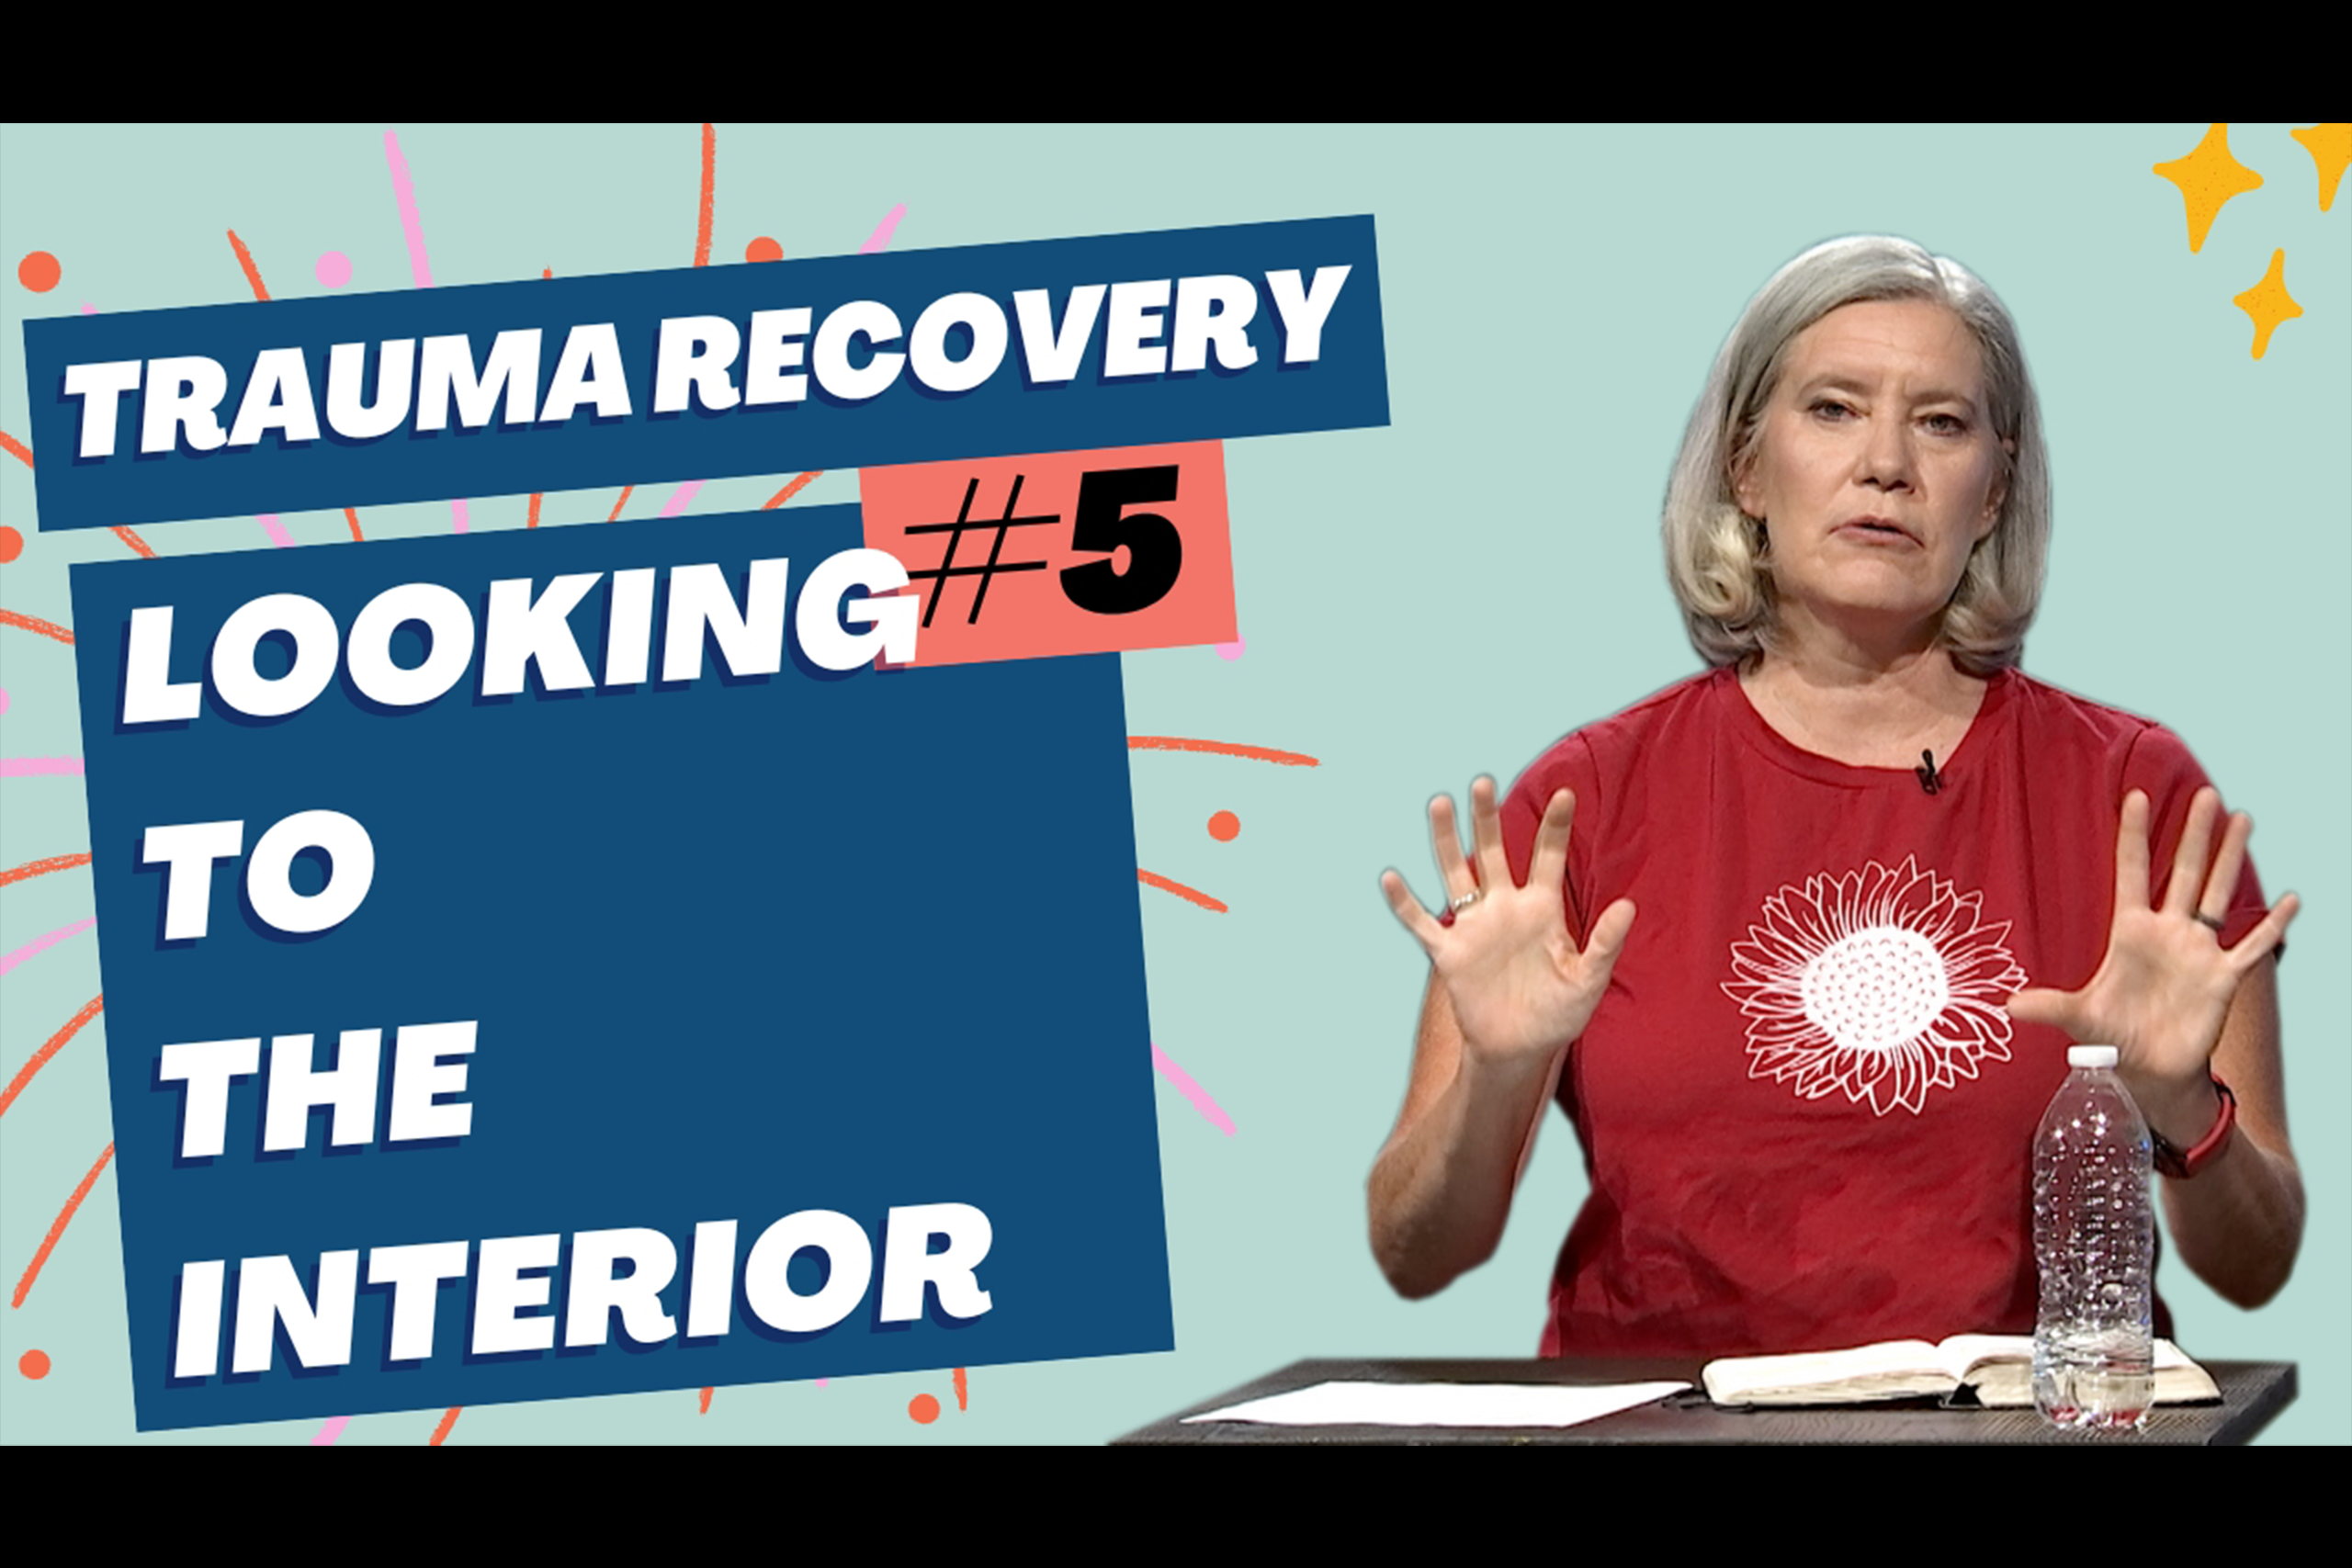 5-Trauma-Recovery-Looking-to-the-Interior_Thumb